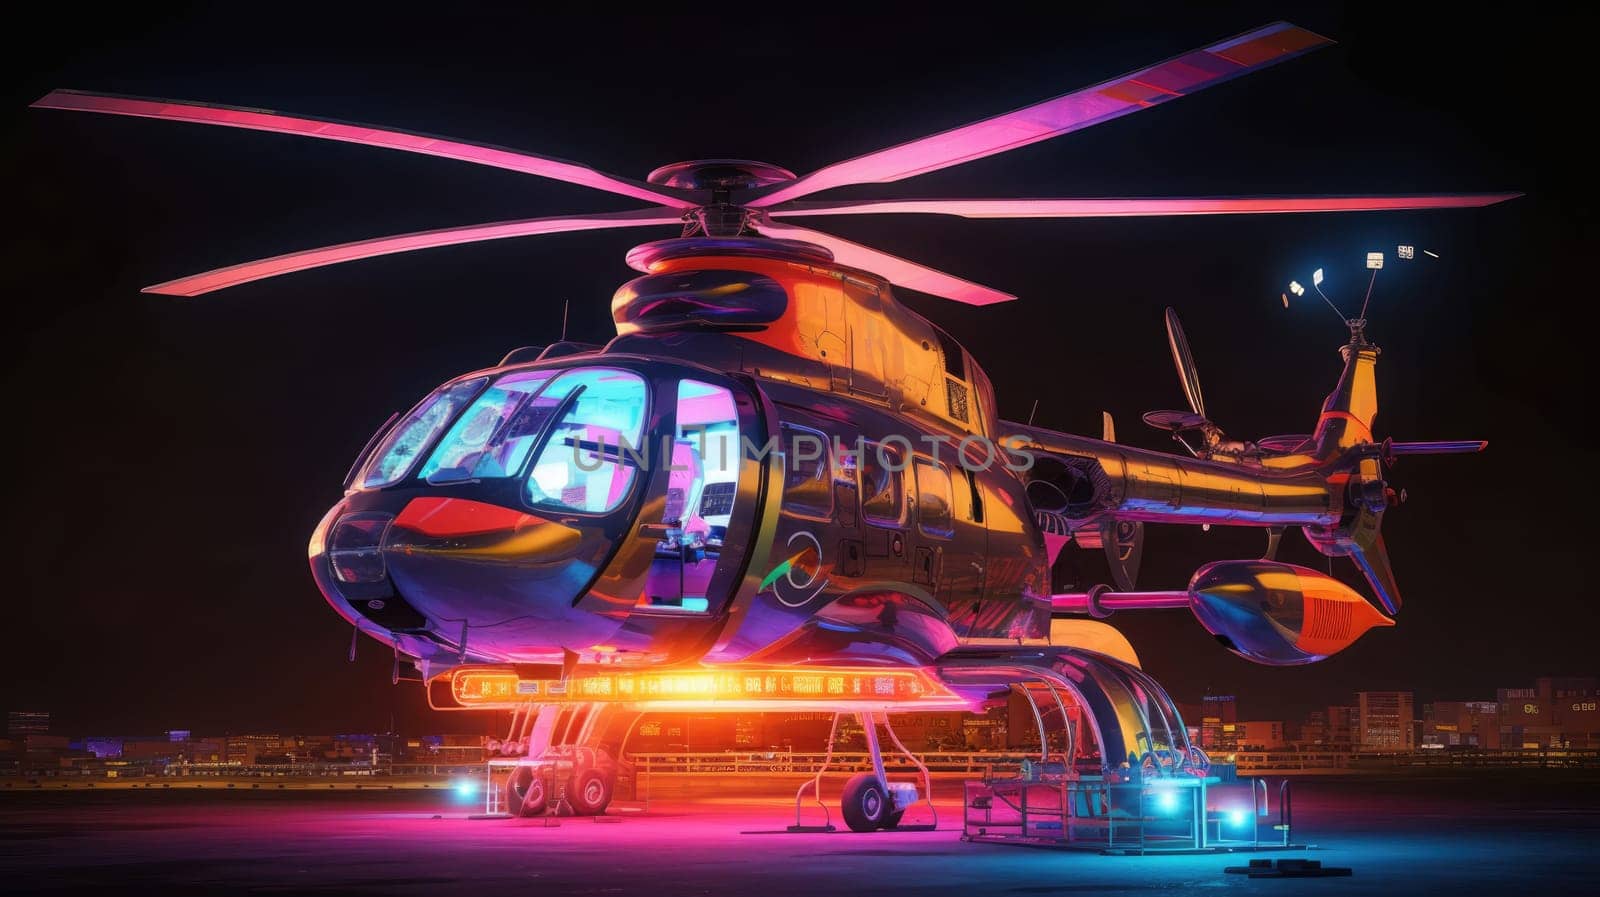 Futuristic helicopter On Black Background In Cyberpunk Style With Glowing Neon Lights by JuliaDorian